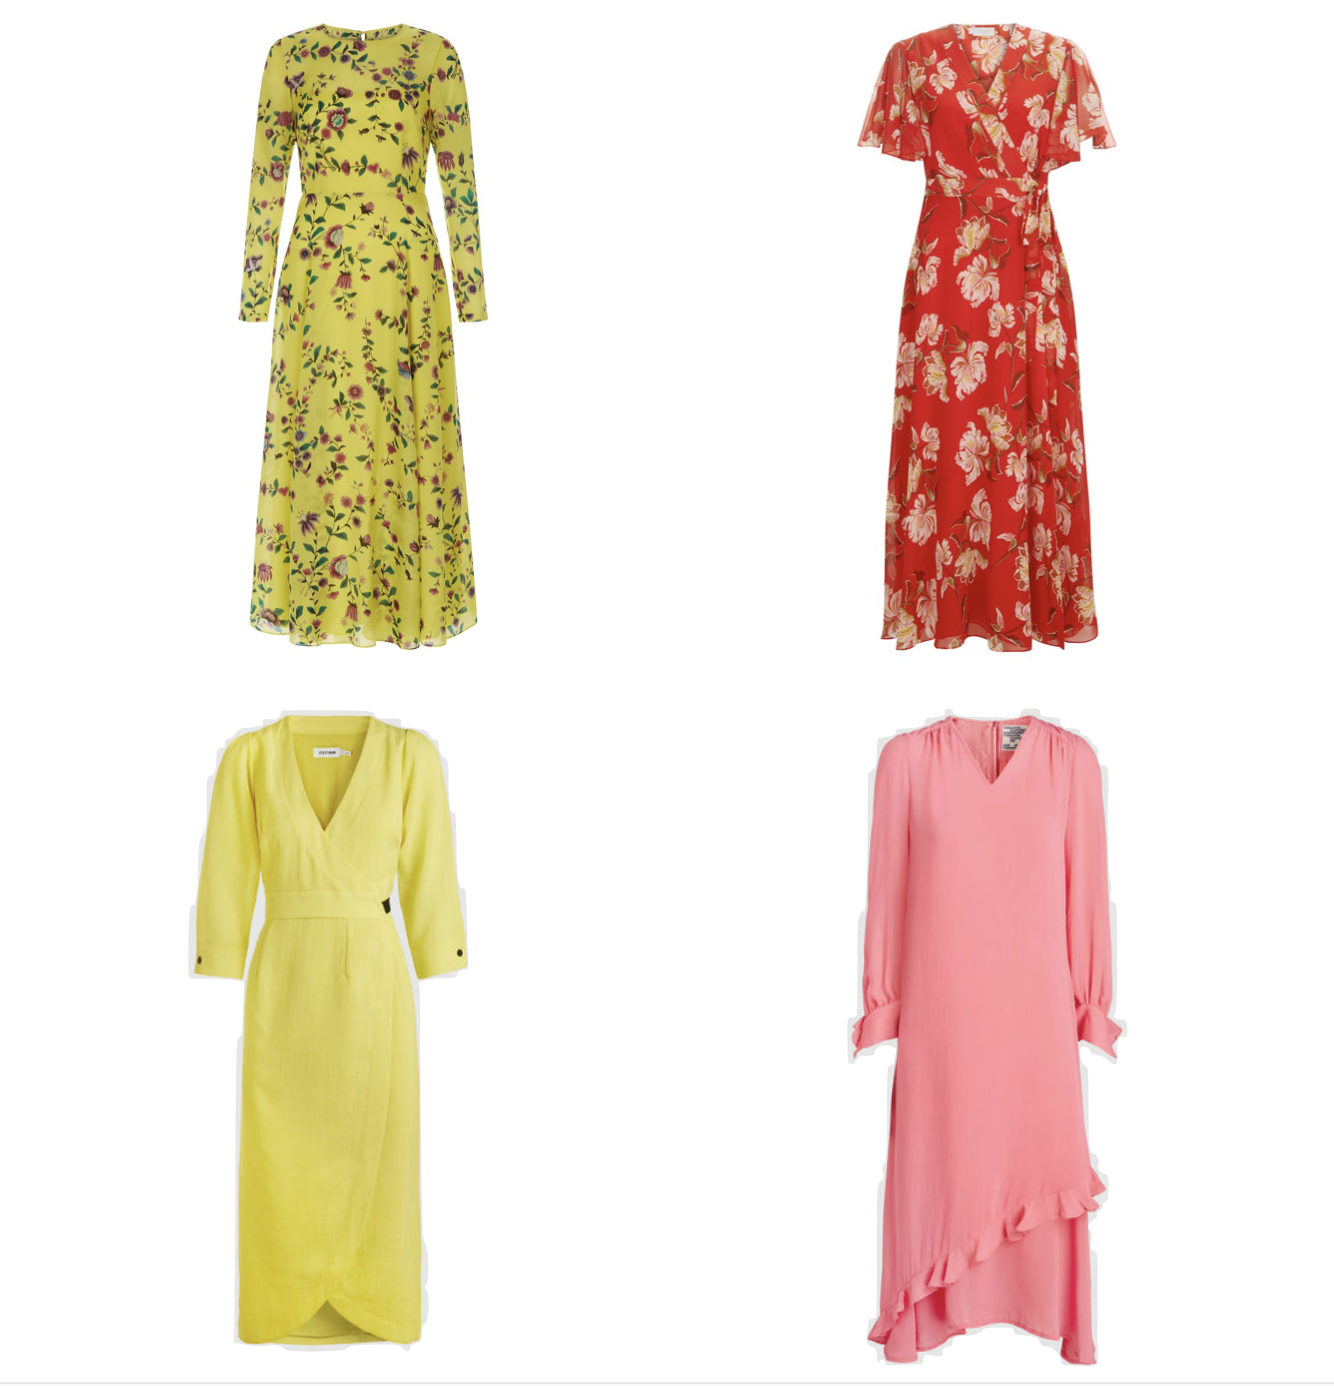 Summer dresses to wear now